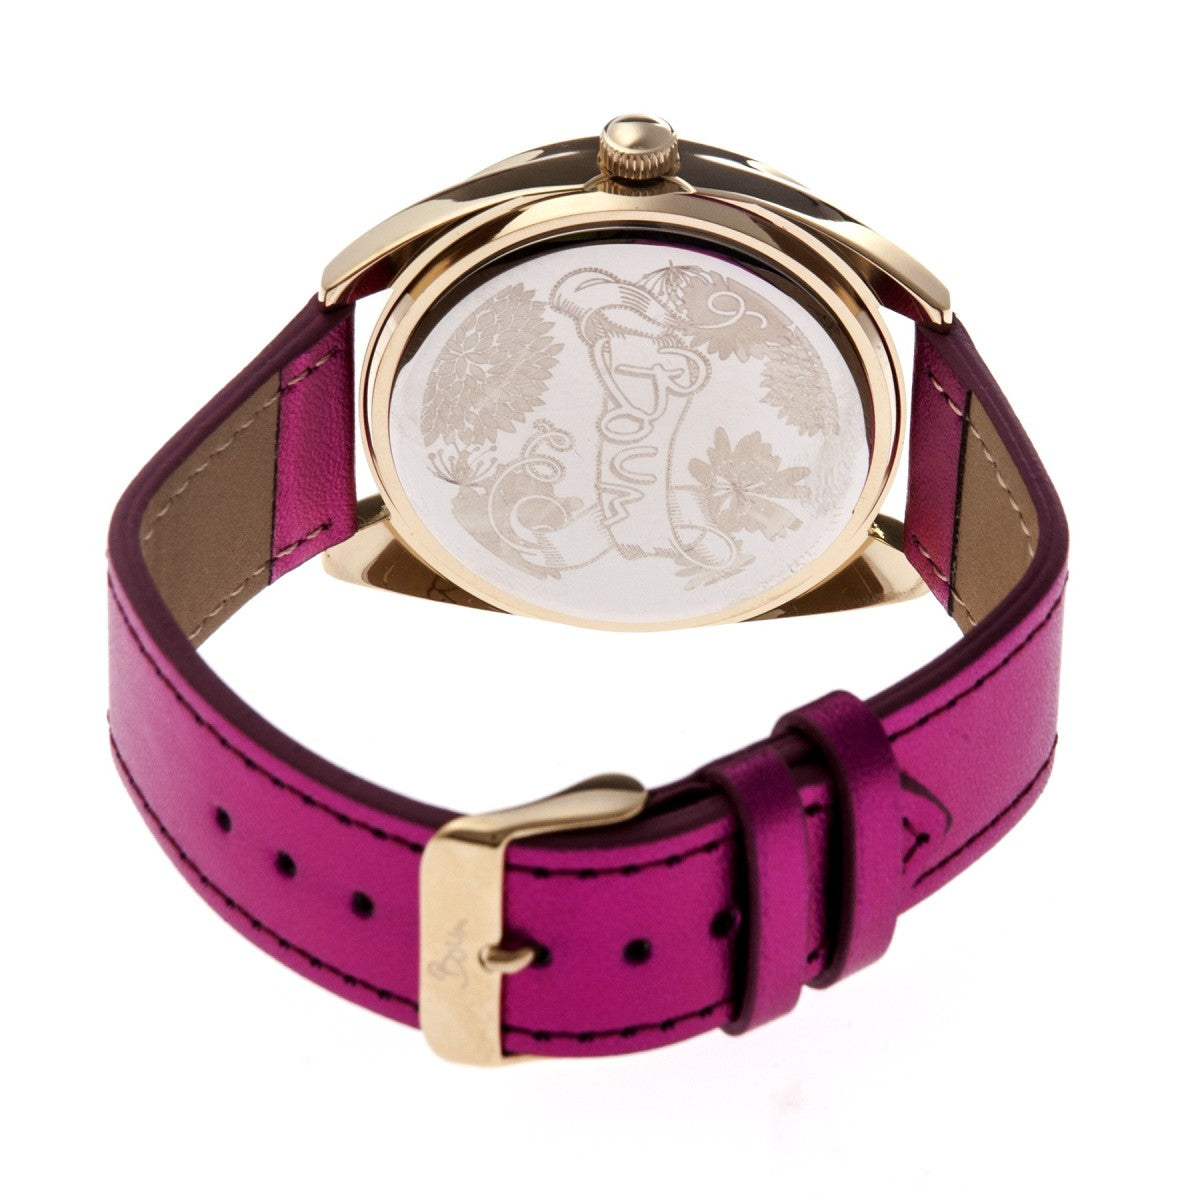 Boum Etoile Glitter-Dial Leather-Band Ladies Watch - Gold/Pink - BOUBM3103